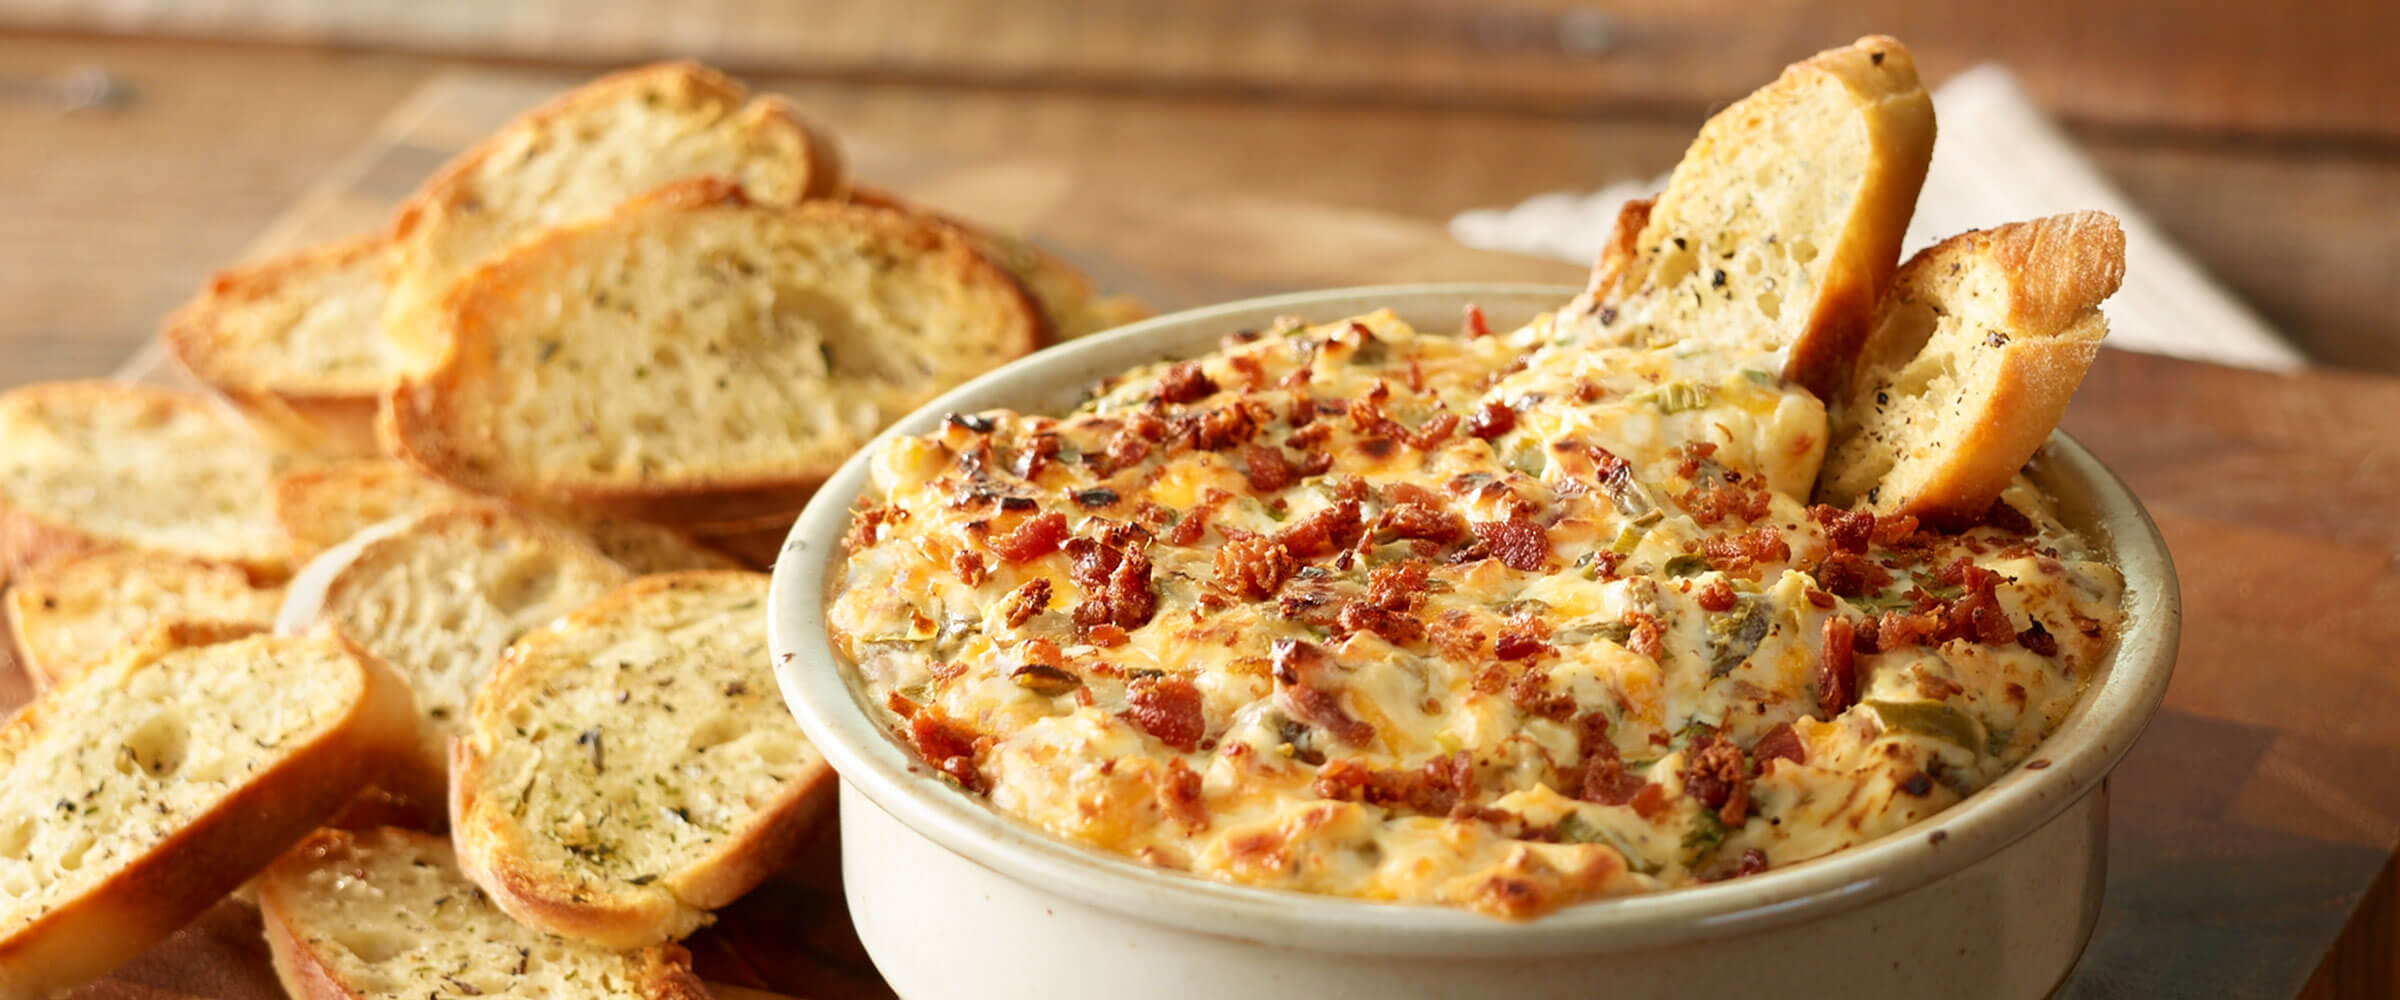 Jalapeño-Bacon Popper Dip in bowl with crostini slices for dipping